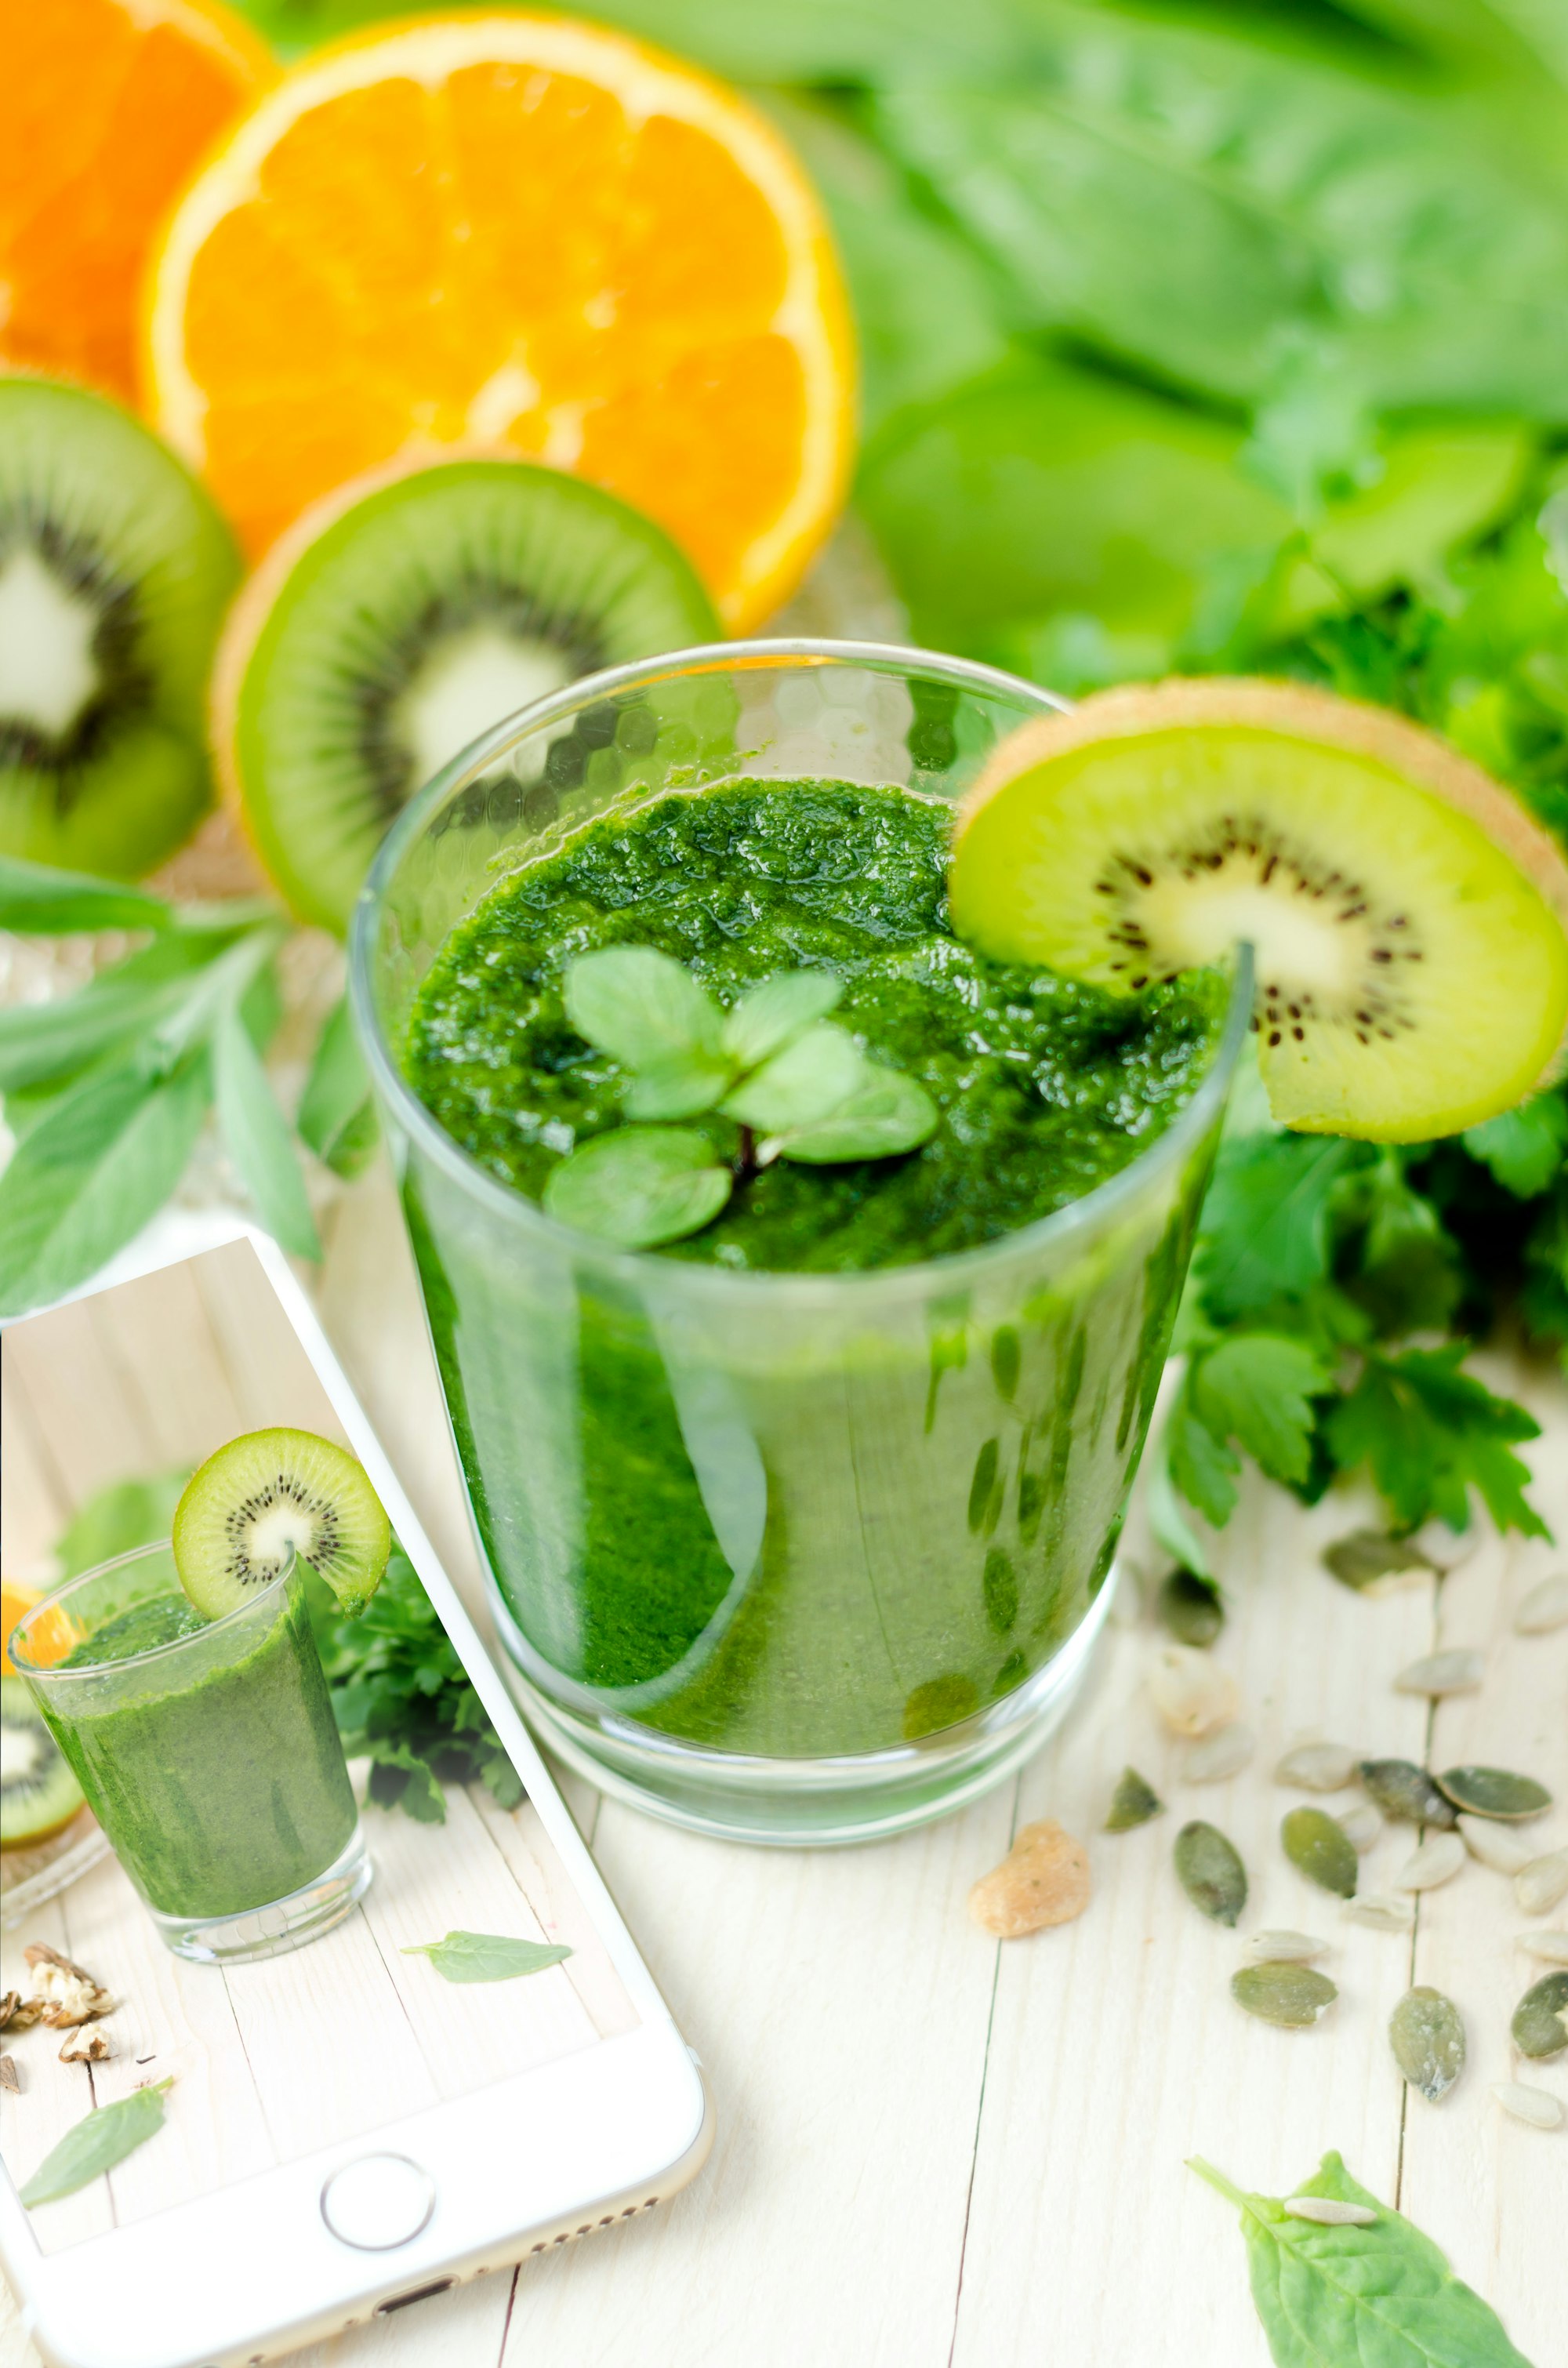 Cleanse and detox your kidneys naturally.